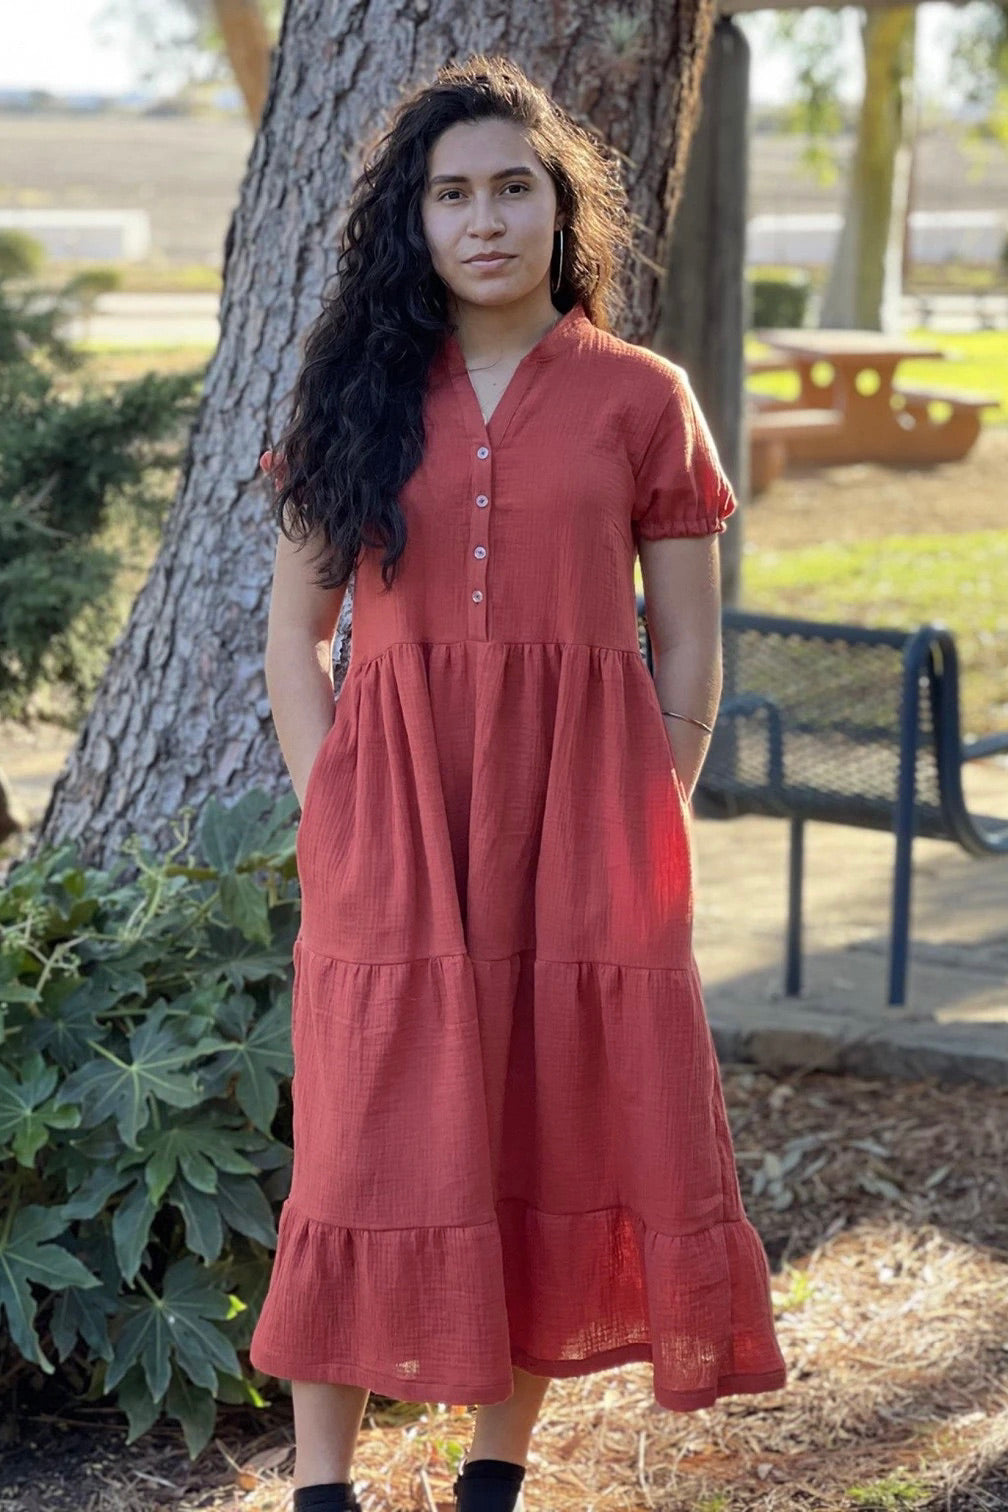 Woman wearing the Freedom Dress sewing pattern from Wardrobe by Me on The Fold Line. A dress pattern made in cotton, viscose, Tencel or silk fabrics, featuring a V-neck, button front bodice, short sleeves with elastic cuffs, in-seam pockets, midi length a